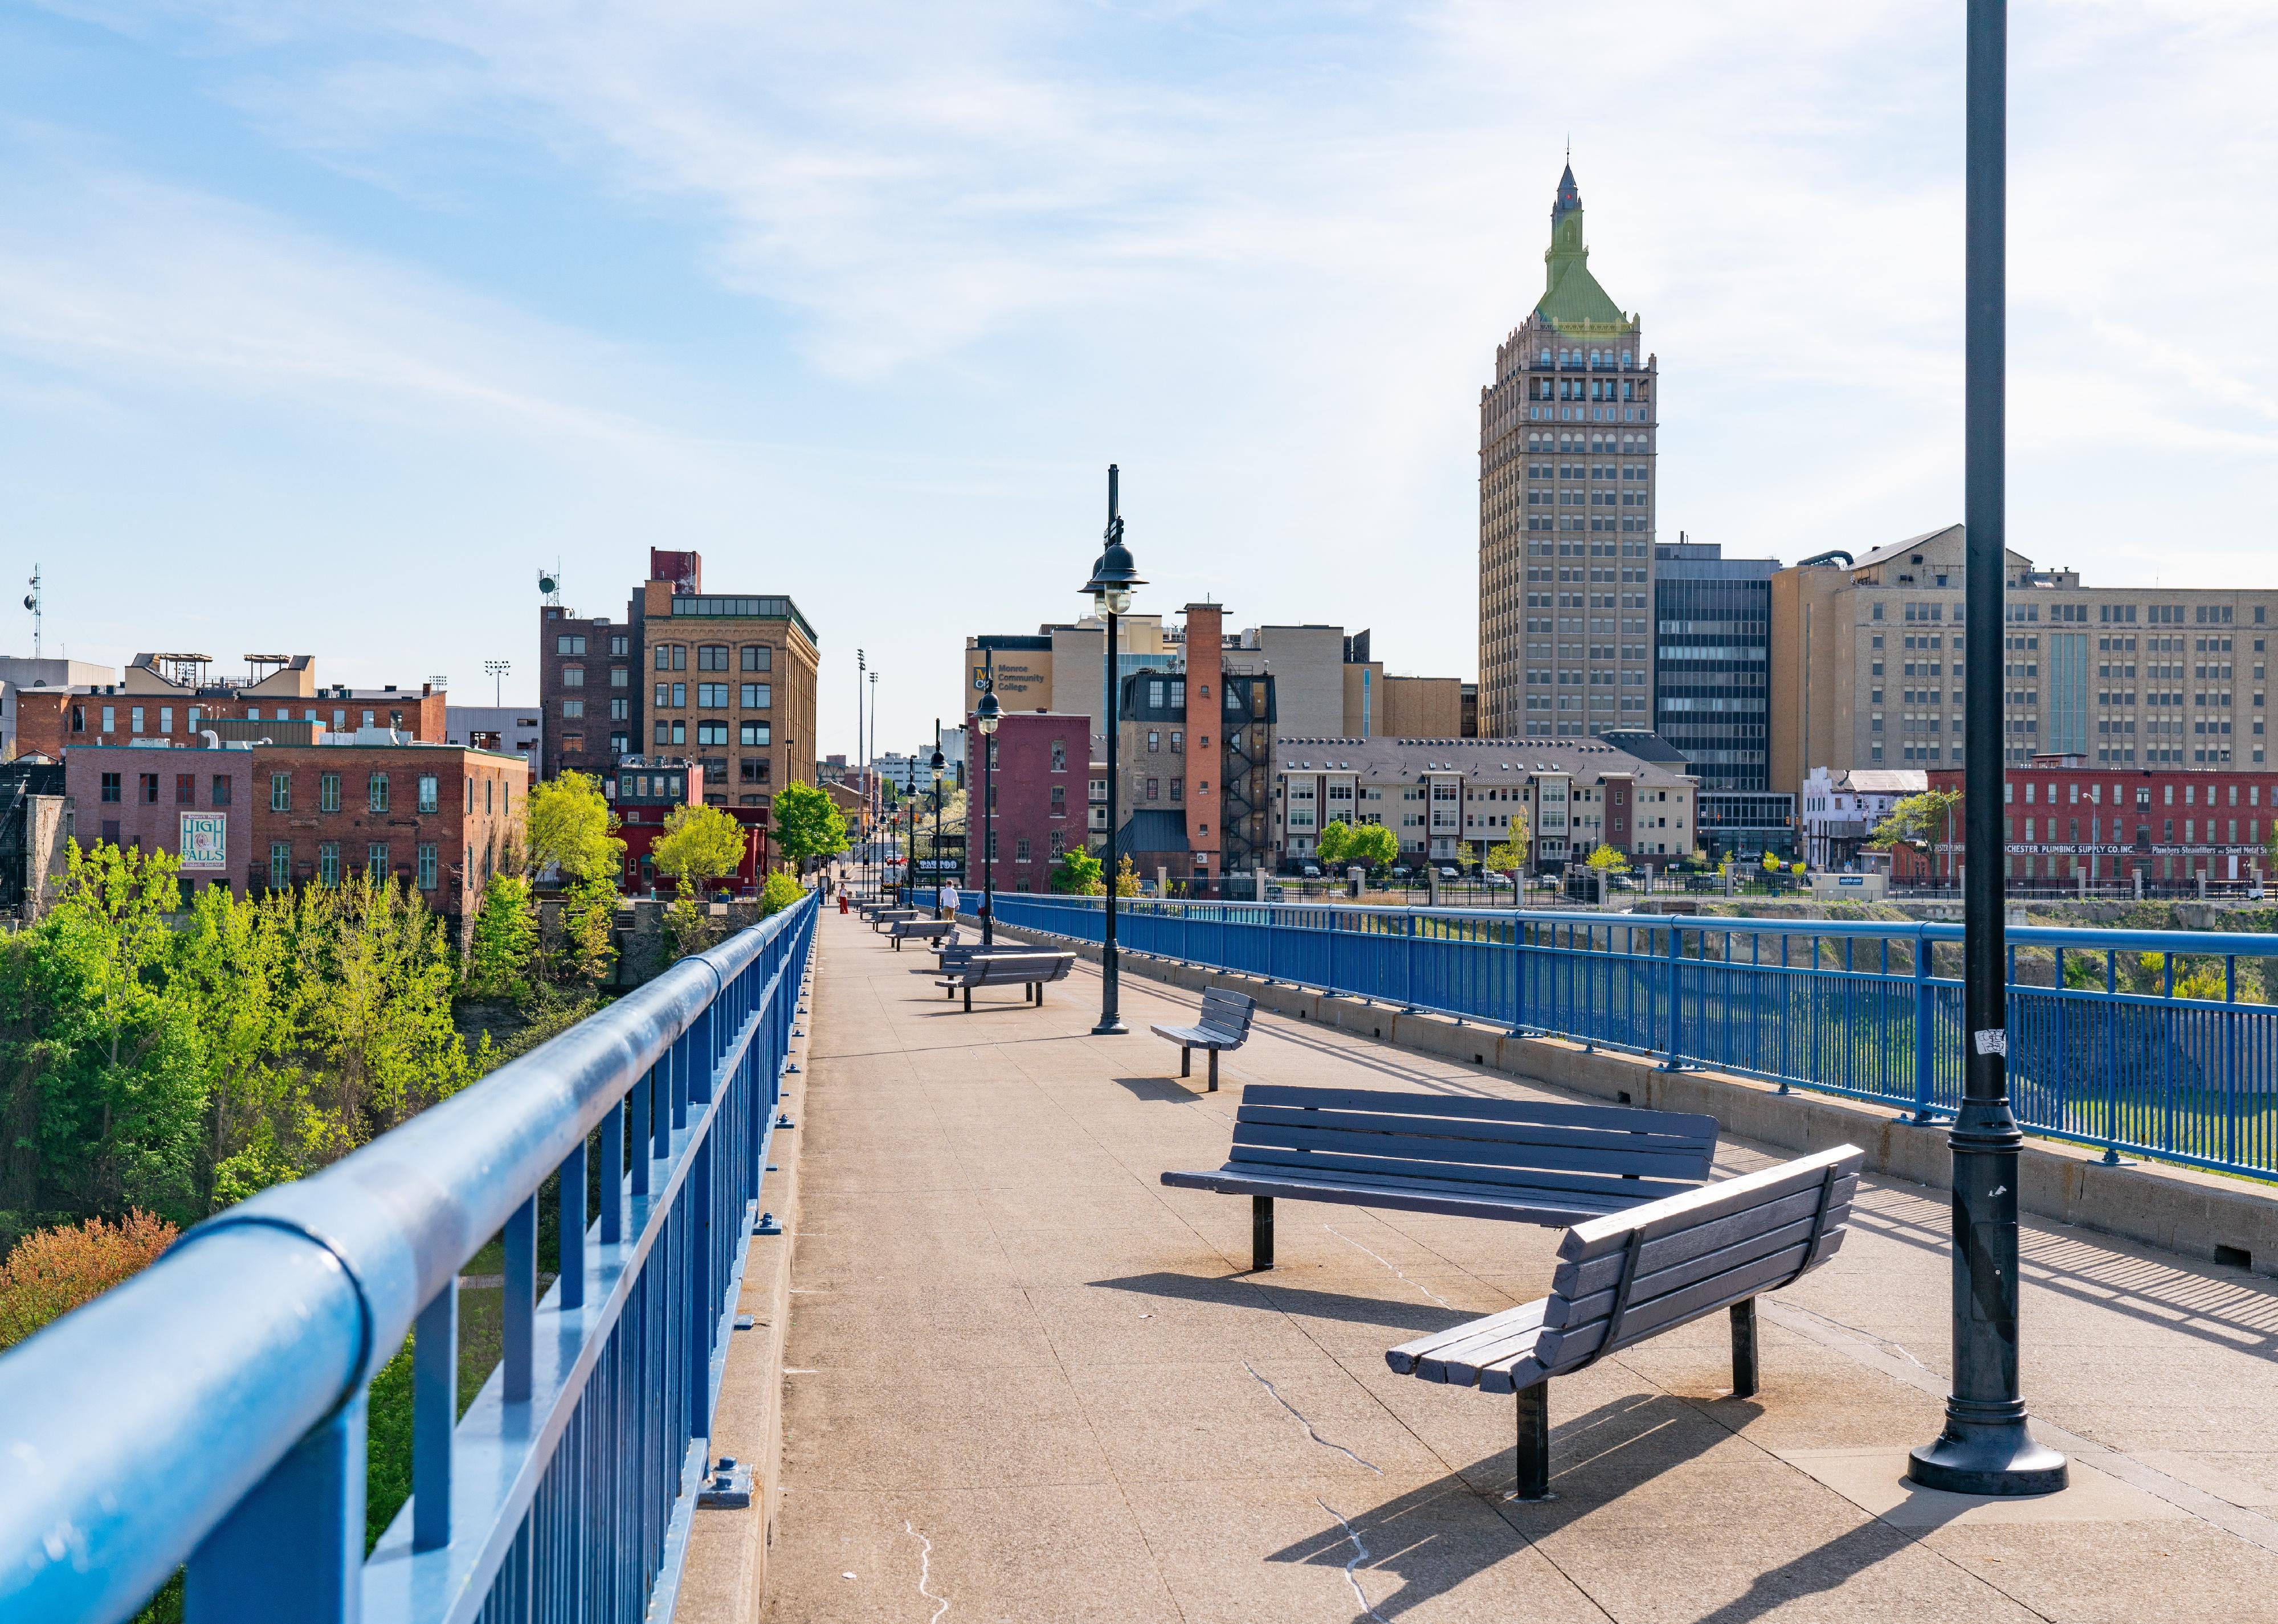 A view of Rochester, New York, from the Pont de Rennes Bridge.